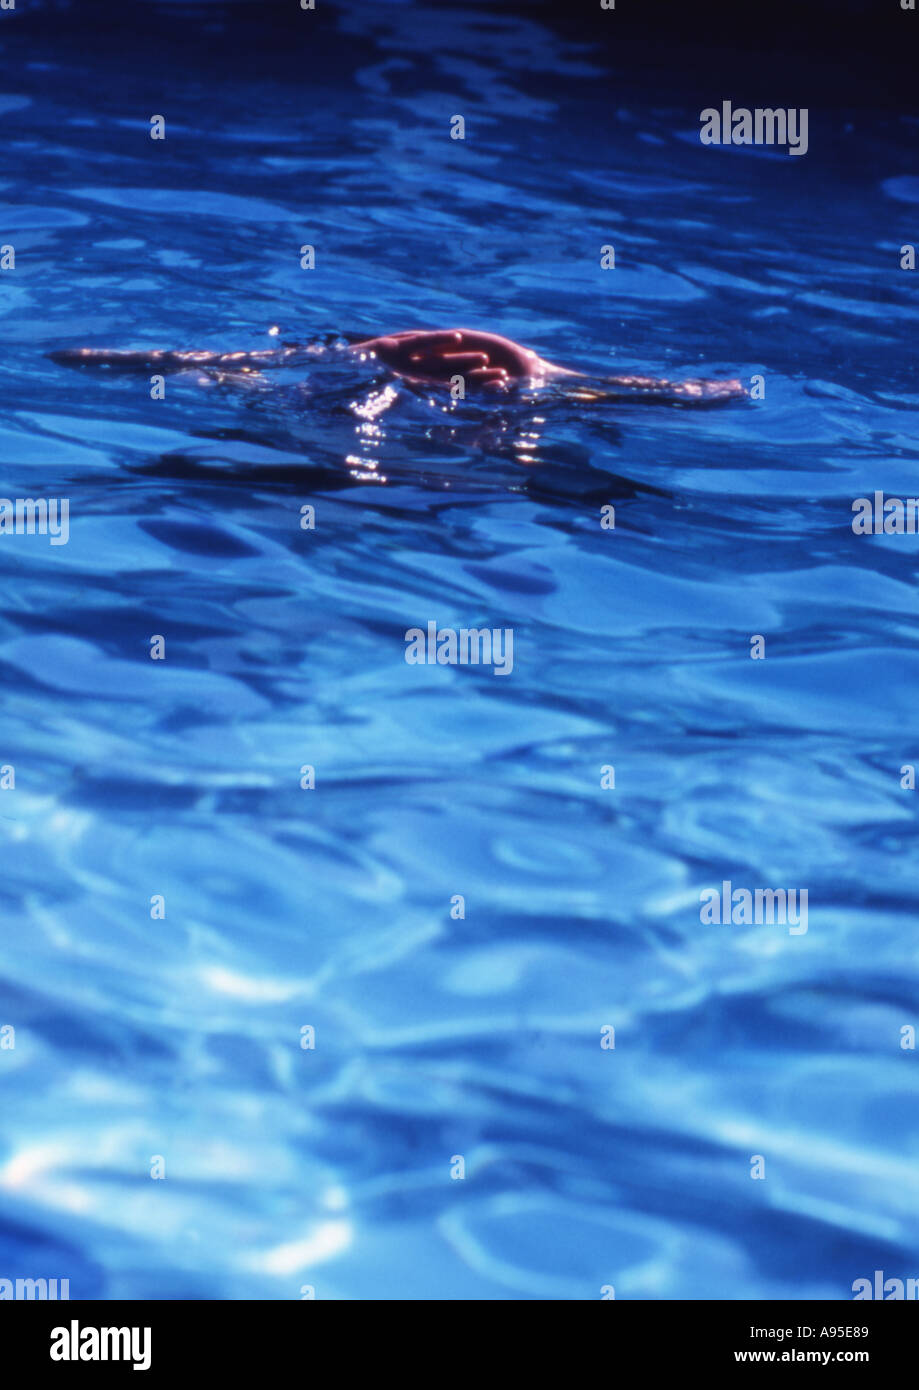 Small pair of hands on top of water Stock Photo